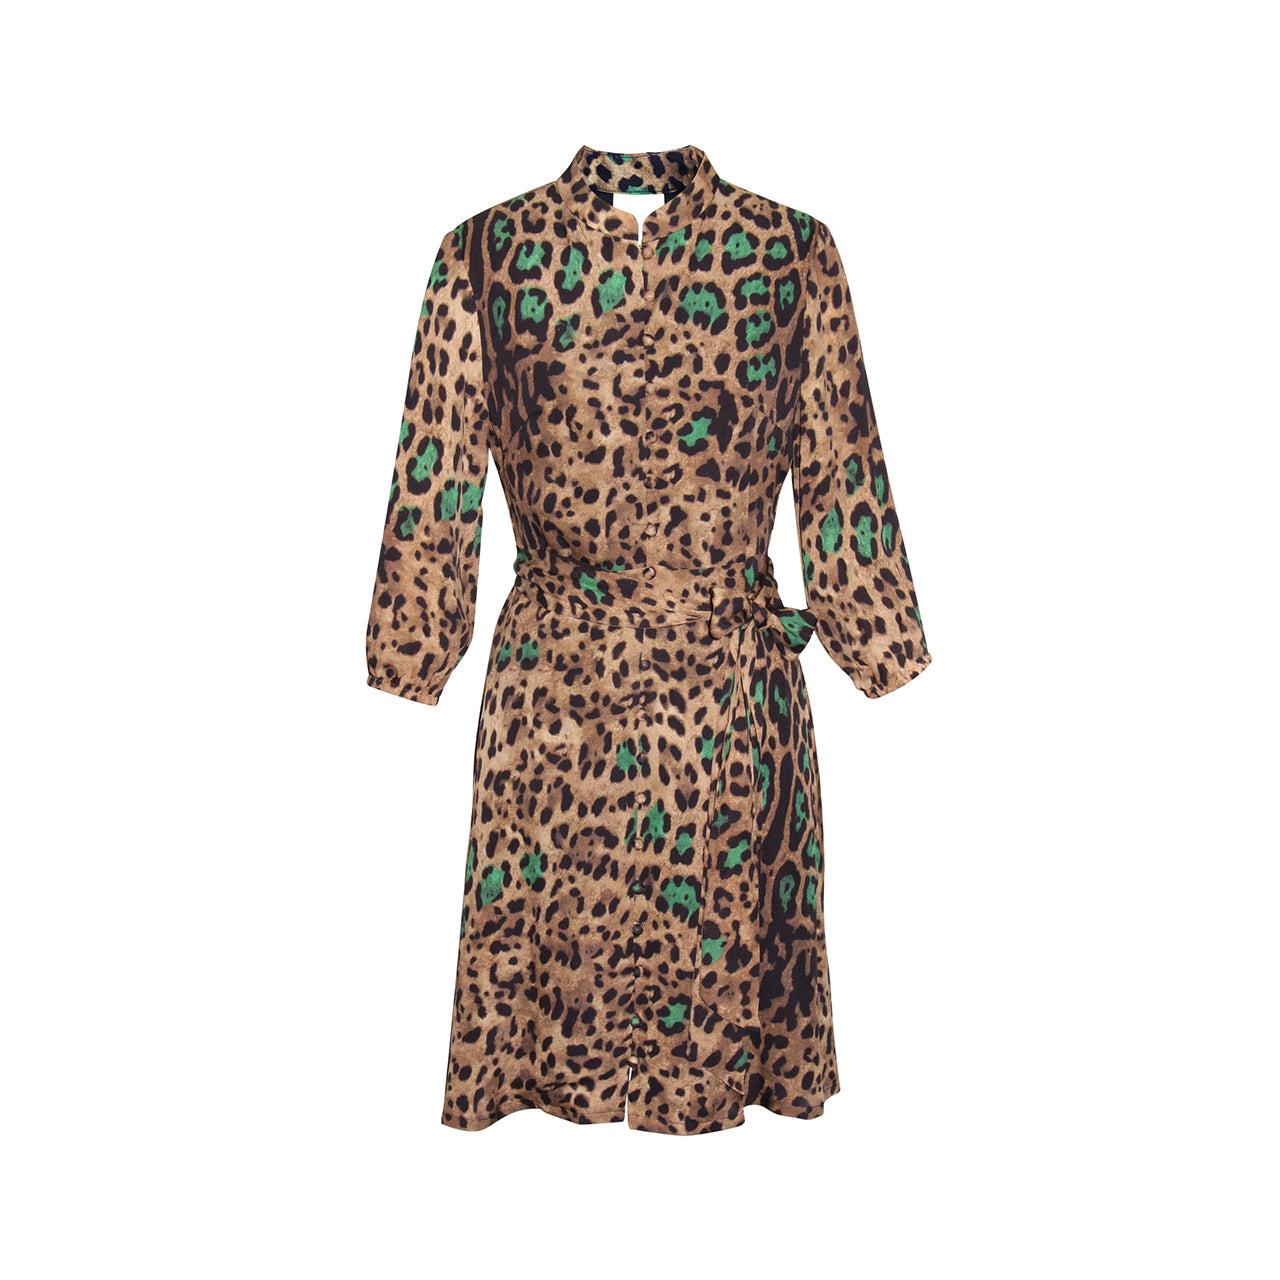 Discover Shelby Leopard Print Dress